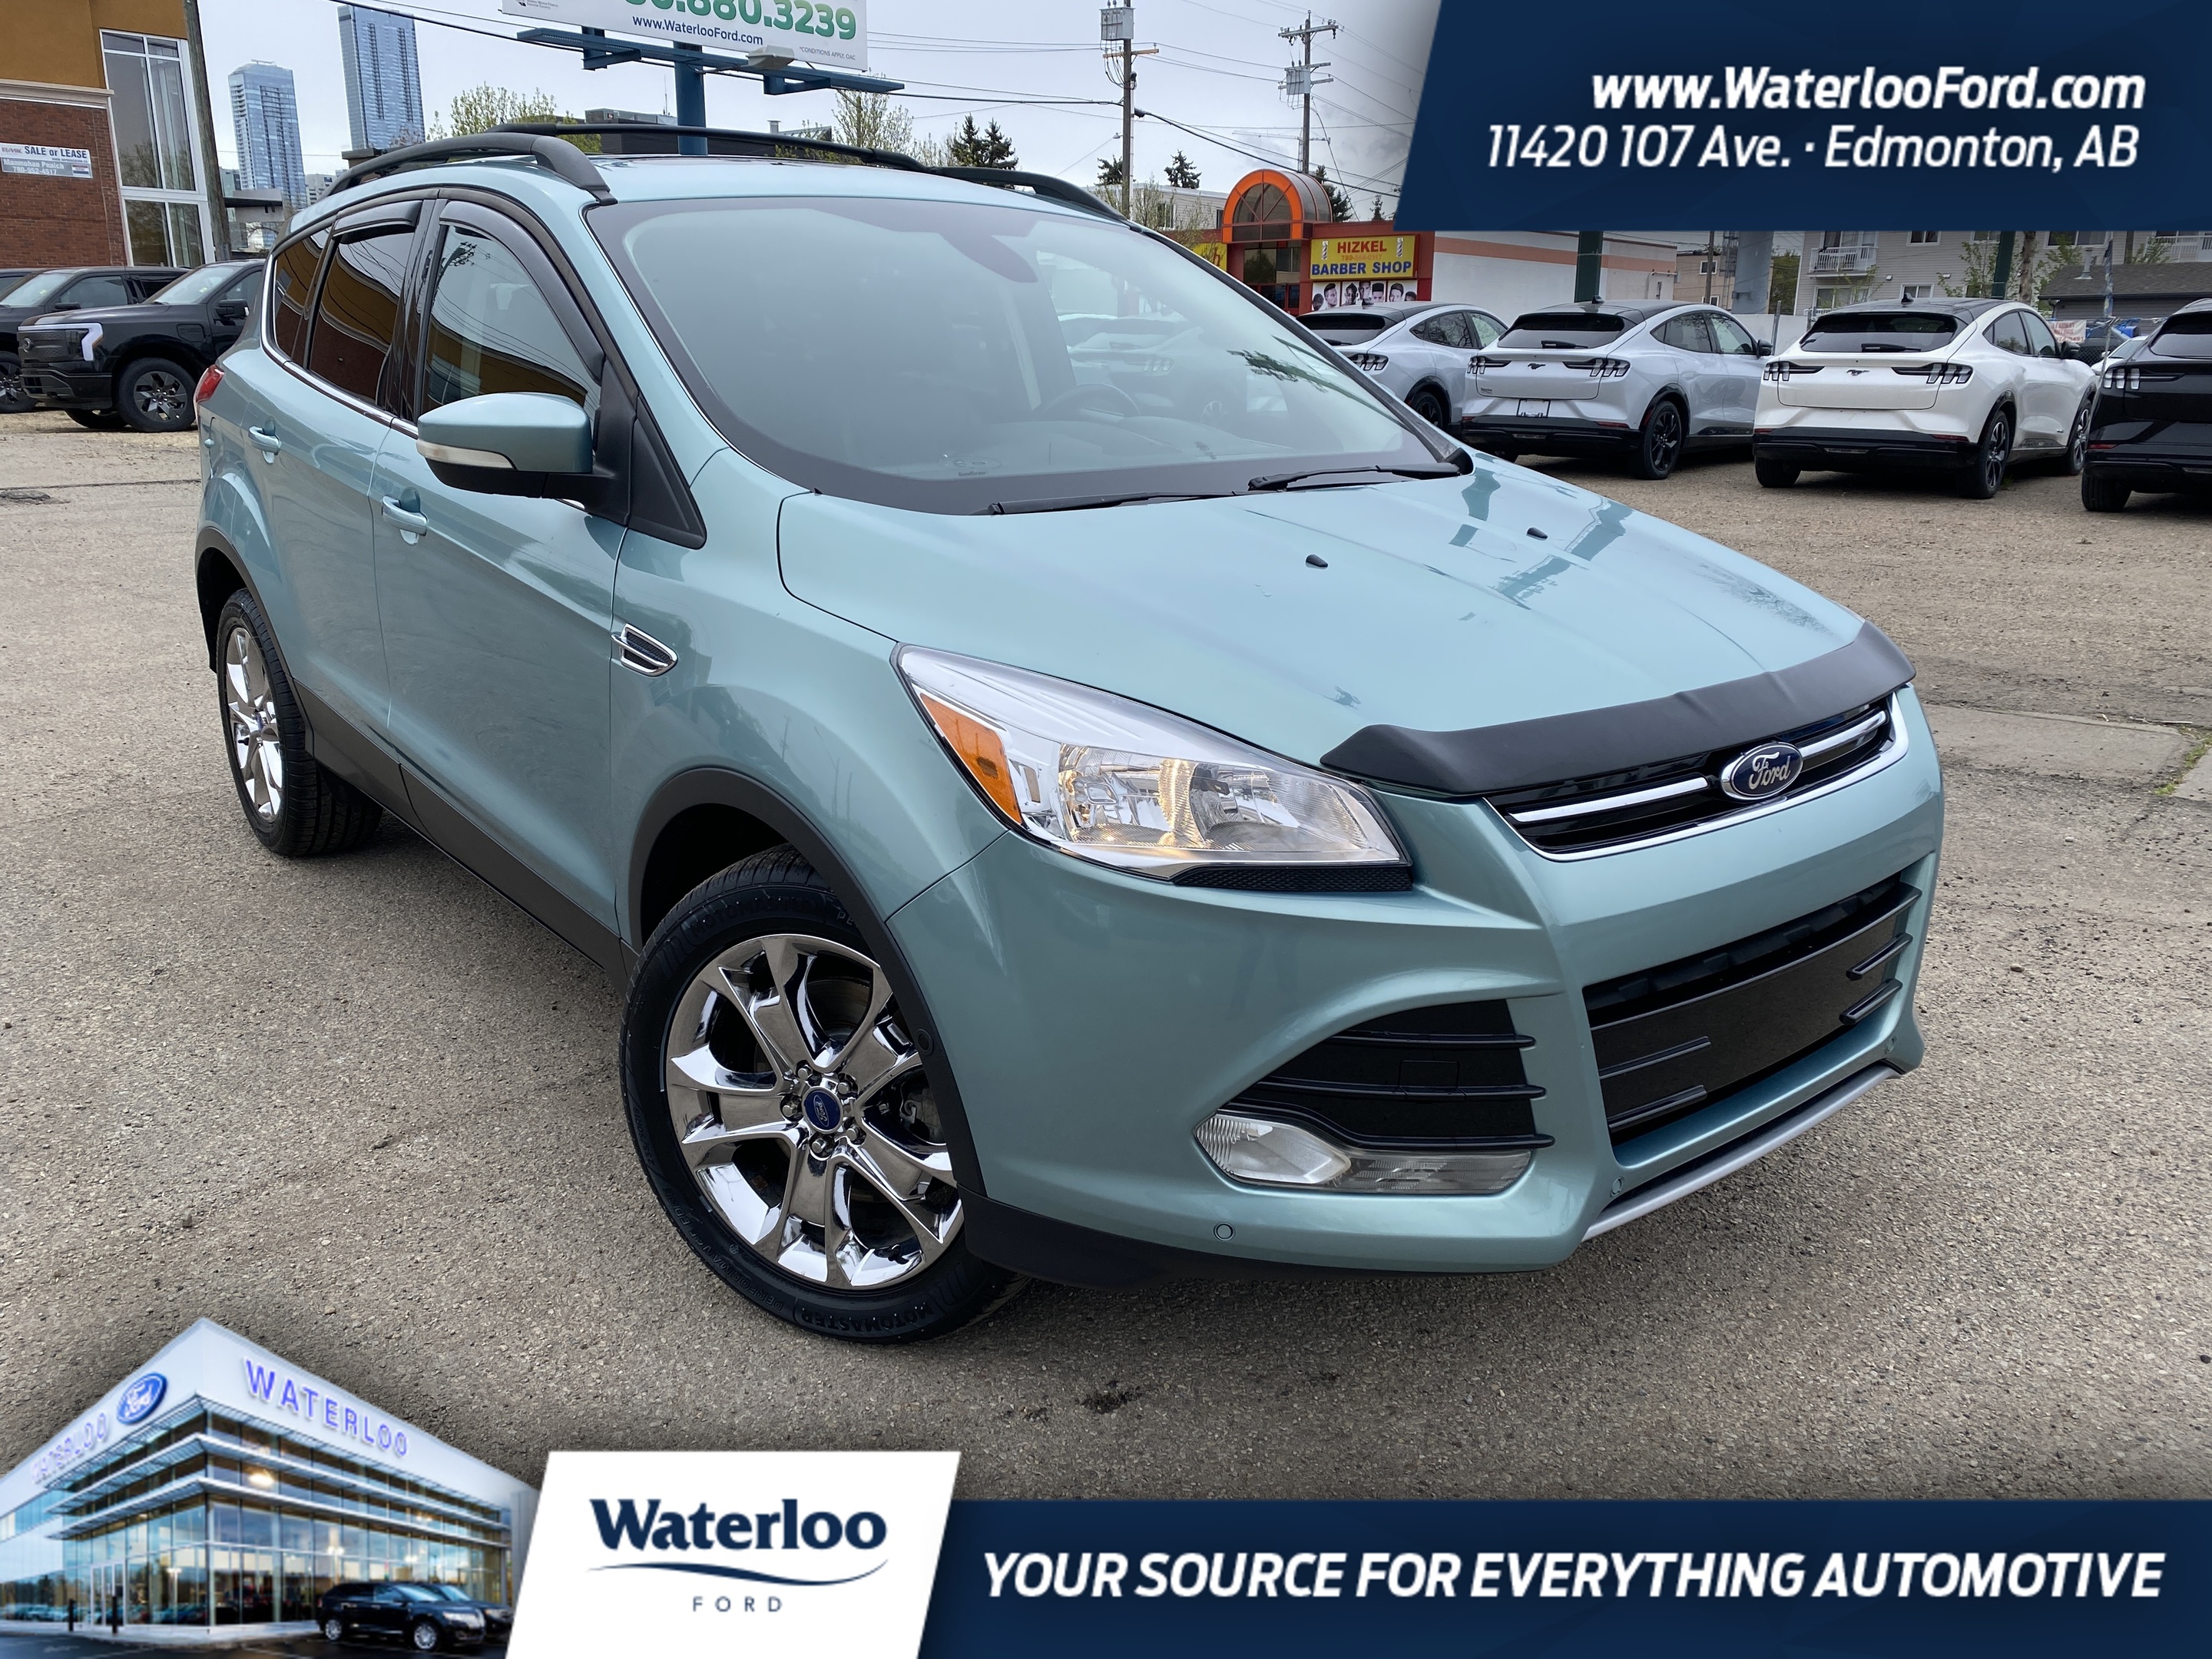 2013 Ford Escape SEL | Remote Start | Panoramic Roof | Heated Seats